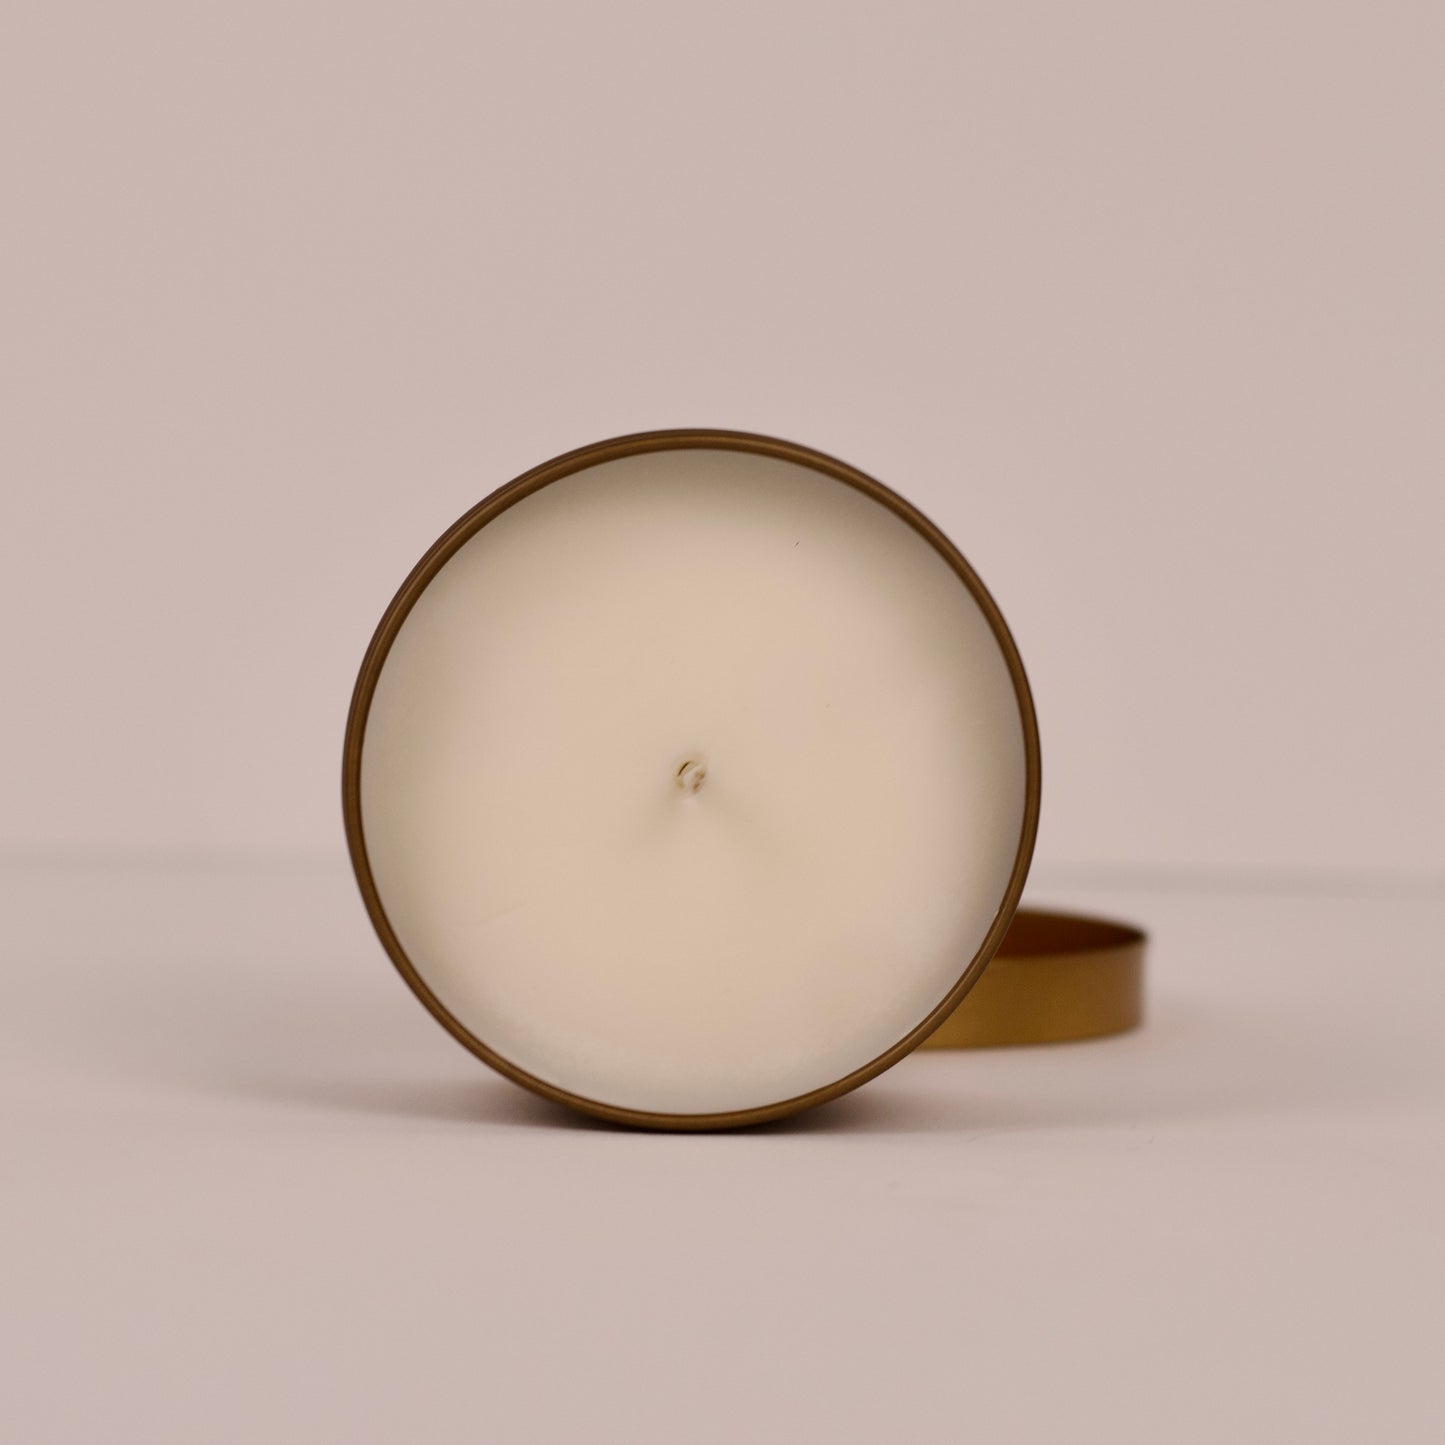 Twinkling Balsam Candle